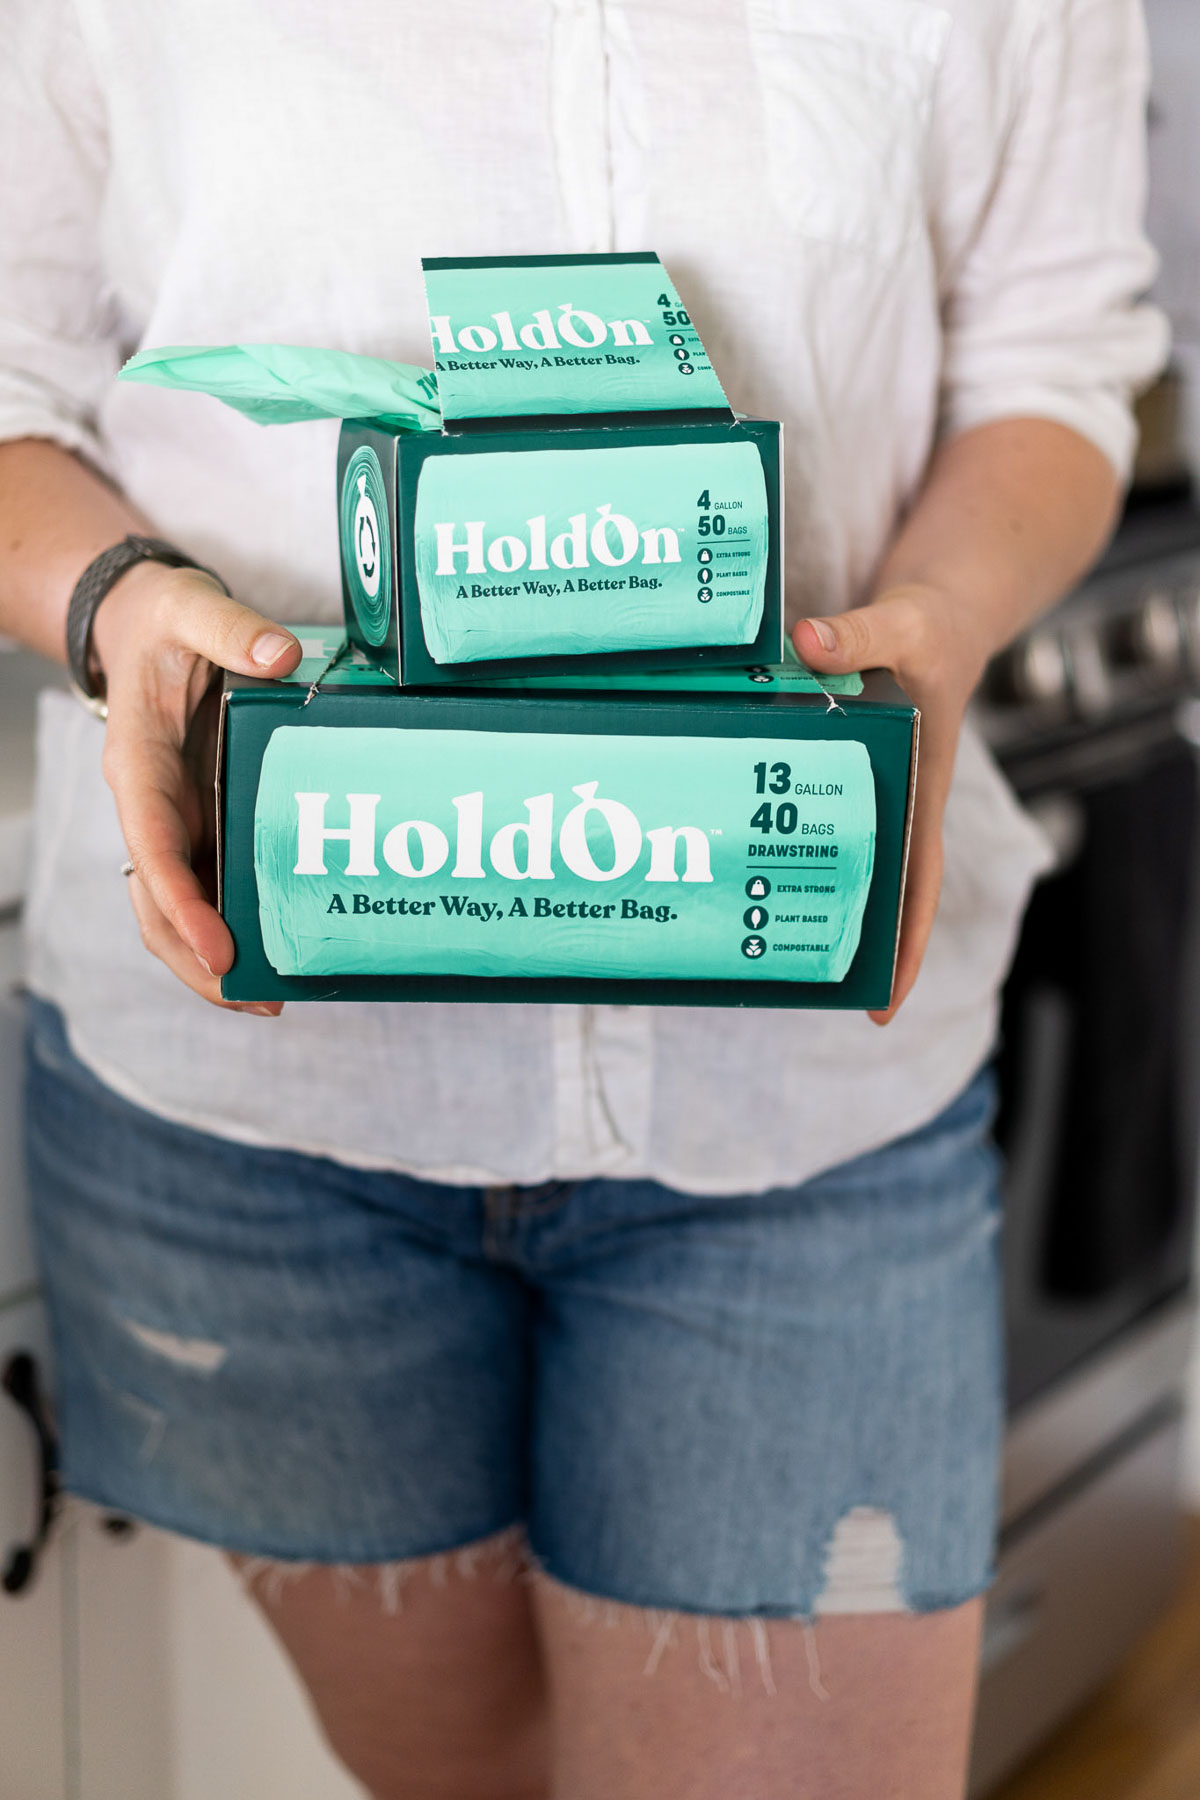 HoldOn Compostable Bags Review + Discount Code - Organic Beauty Lover